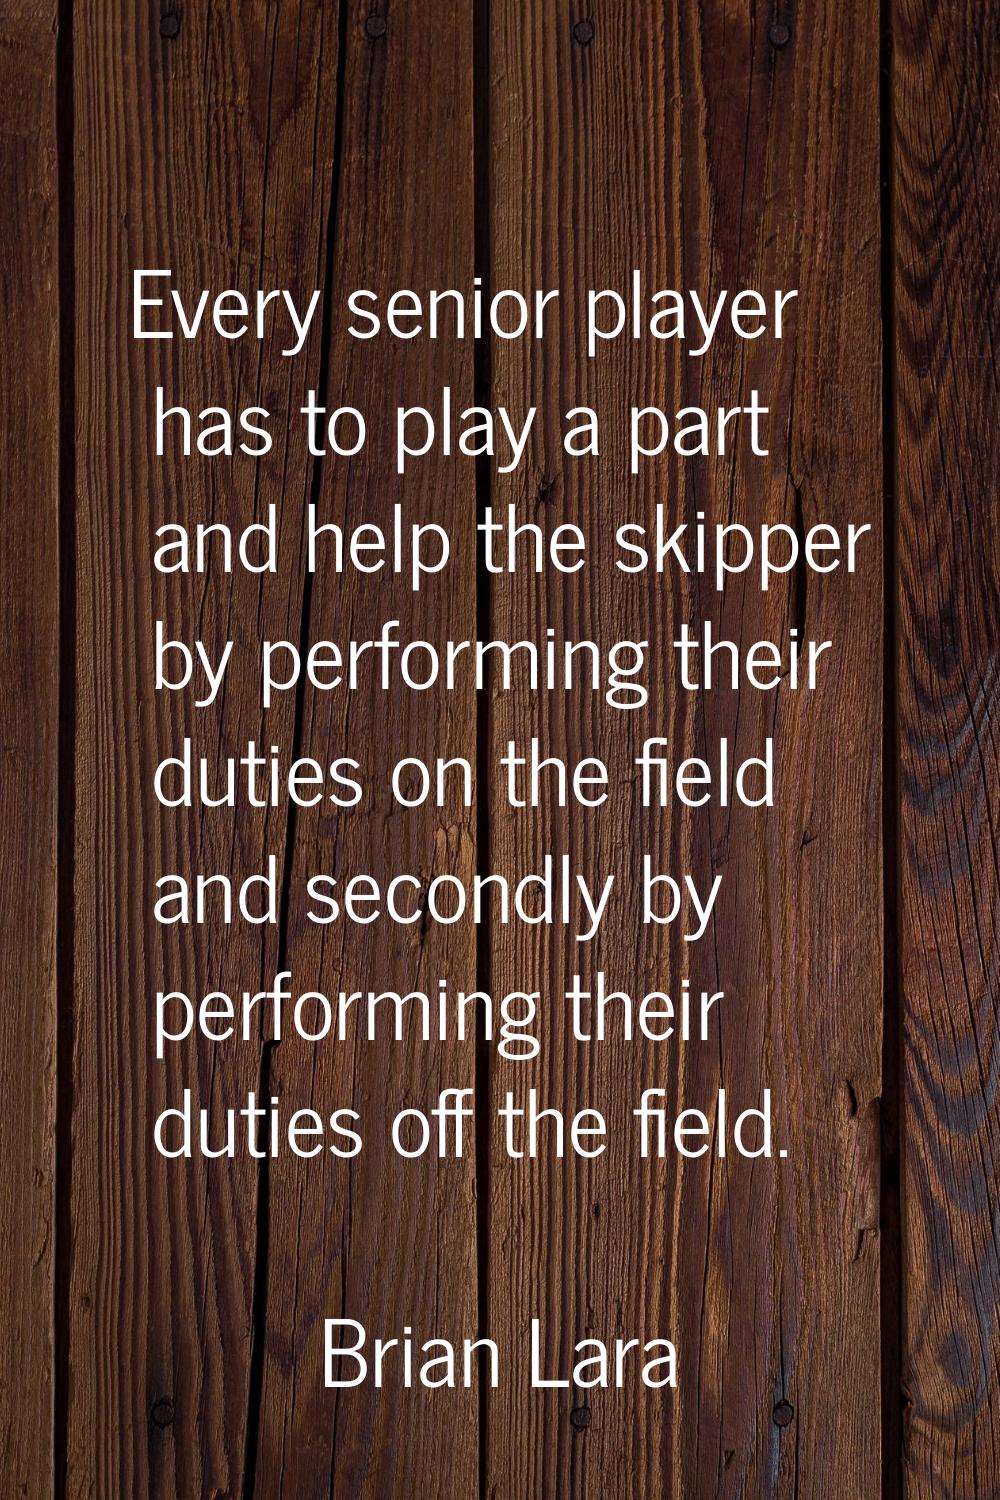 Every senior player has to play a part and help the skipper by performing their duties on the field